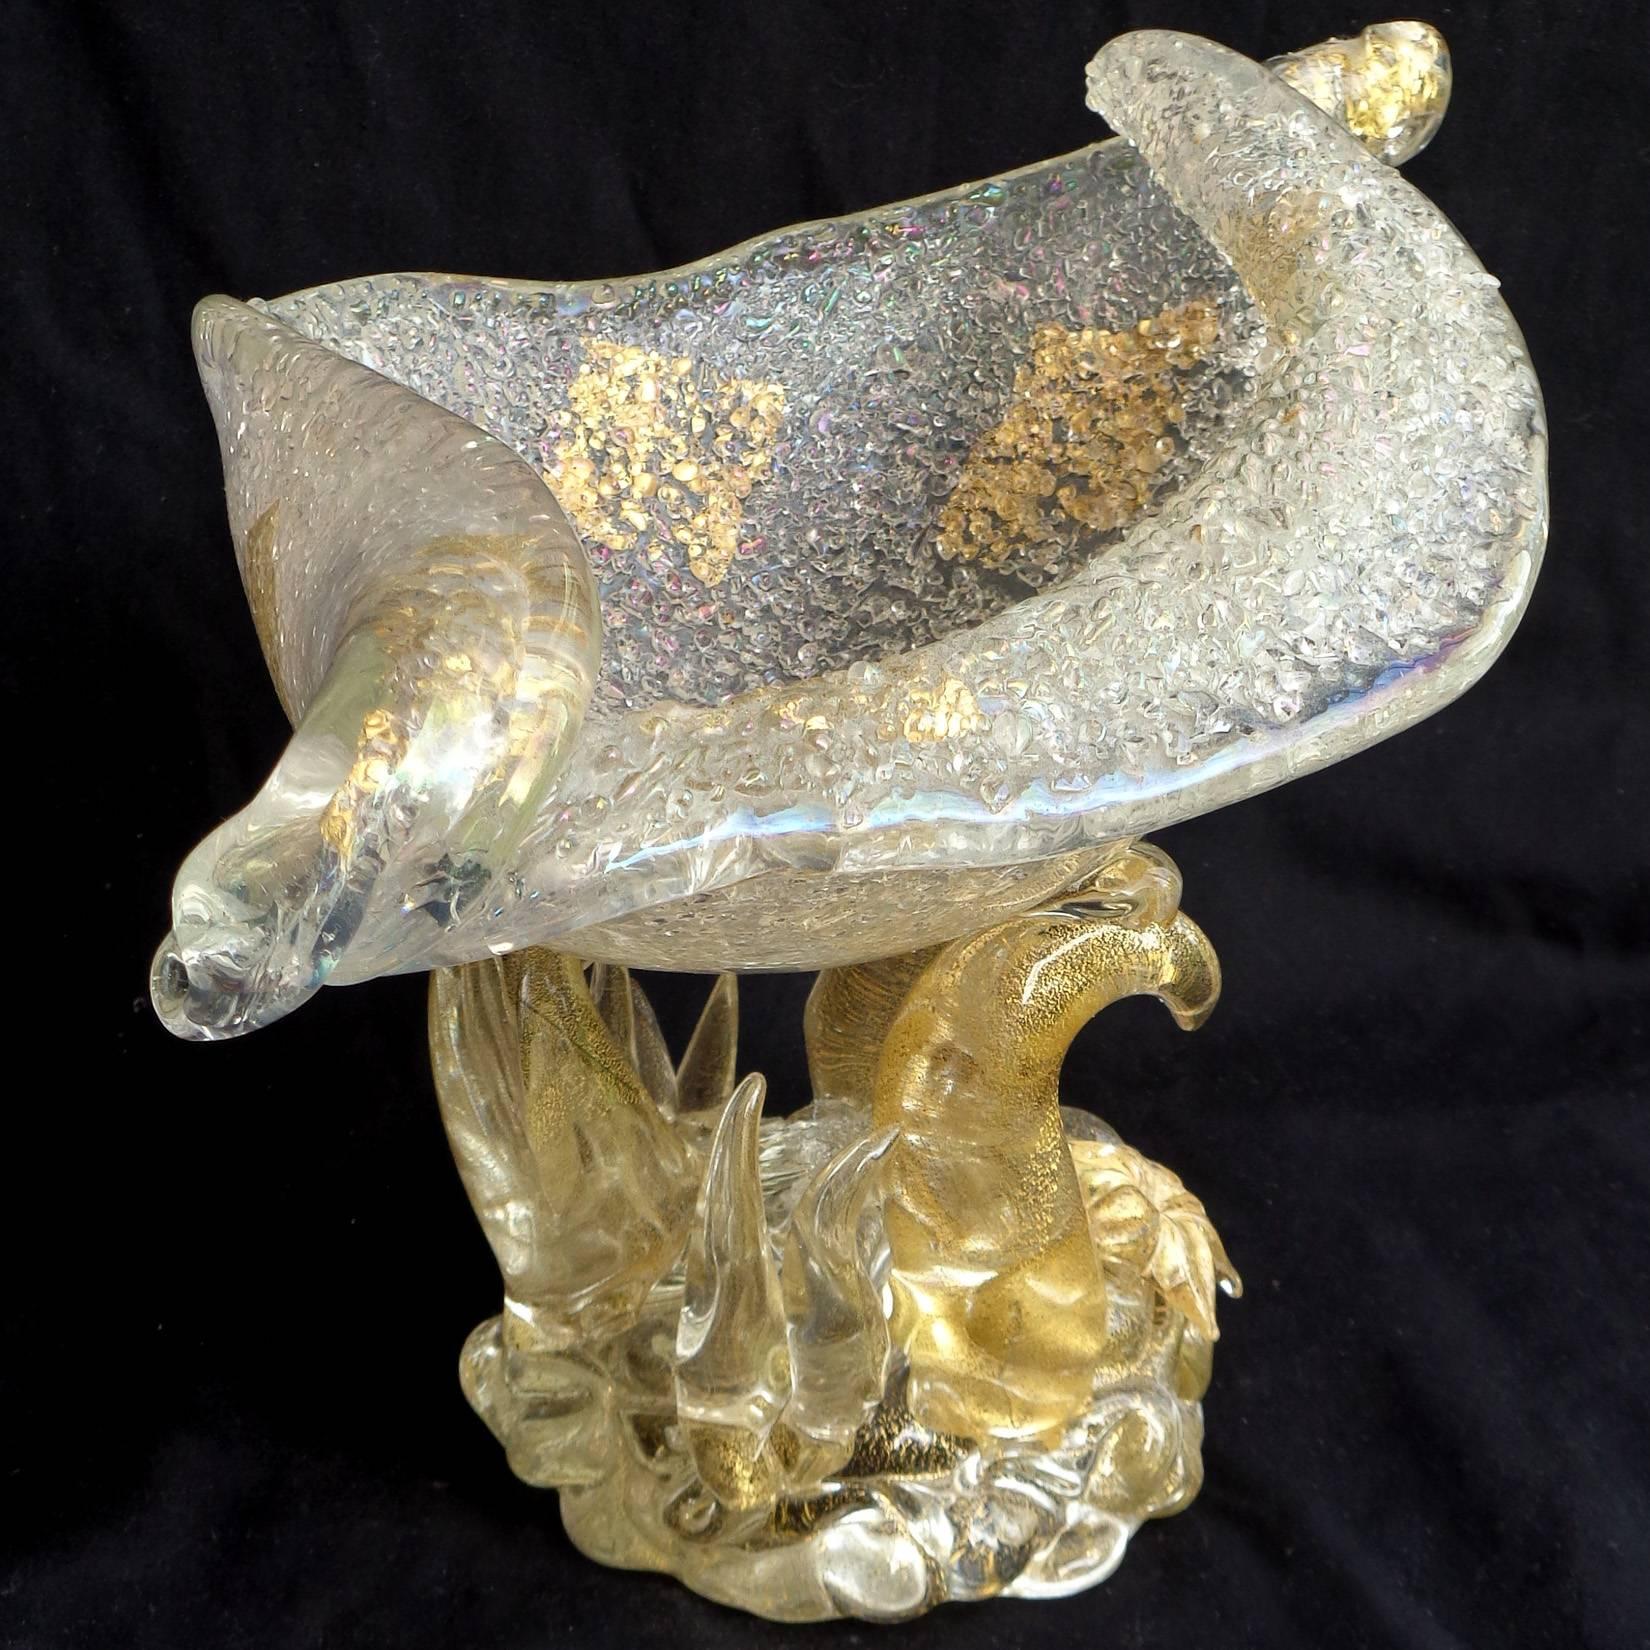 Rare and gorgeous antique Murano hand blown, iridescent, gold flecks and textured Italian art glass conch shell centerpiece bowl. Documented to Ercole Barovier for Barovier e Toso, circa 1940s, in the "Rugiadoso" design. The shell sits